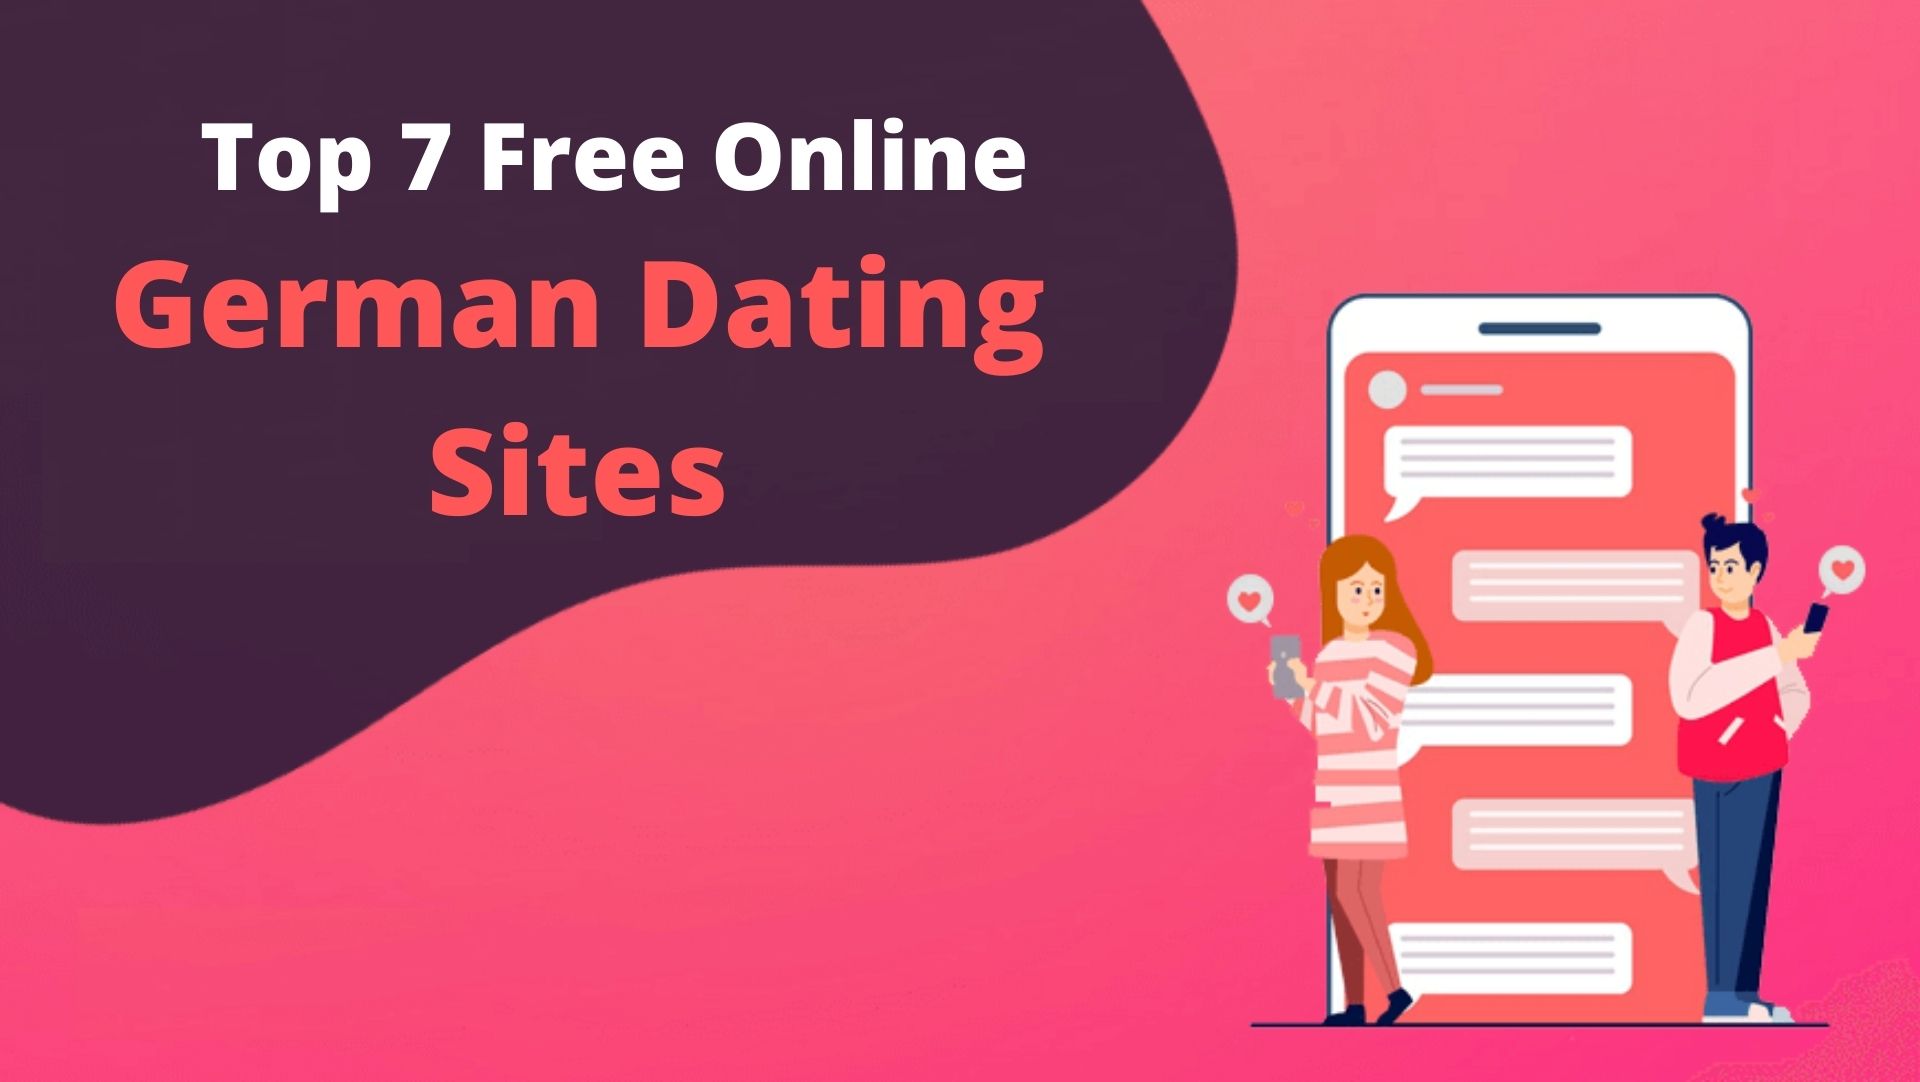 Top 7 Free German Dating Sites - Choose Your Best Matches